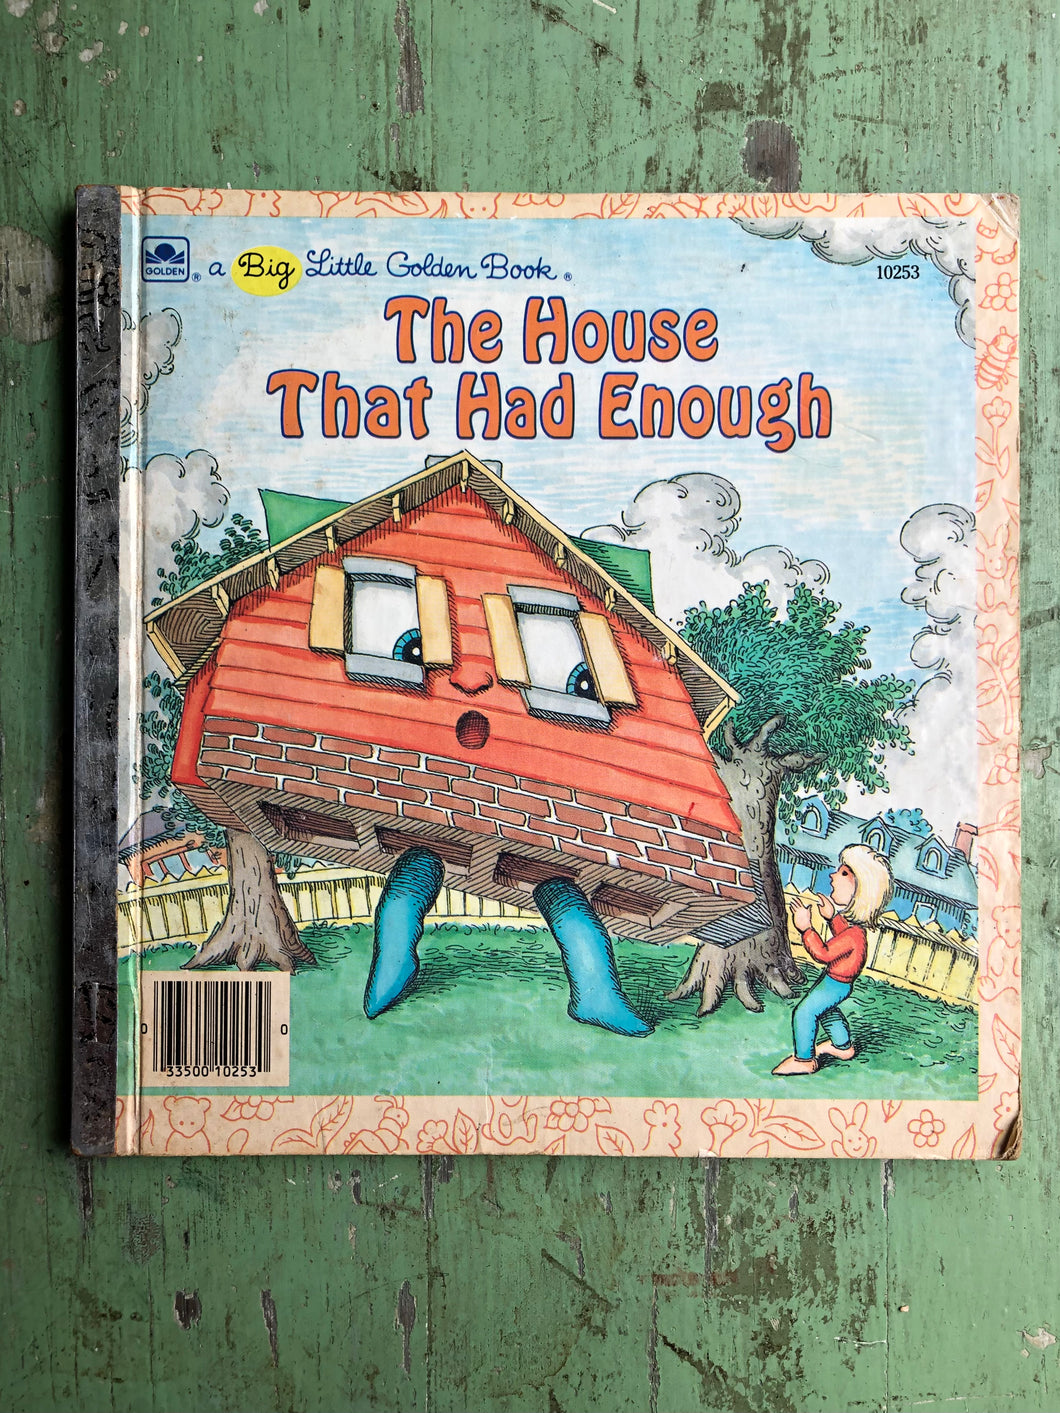 The House That Had Enough by P. E. King. Illustrated by John O'Brien